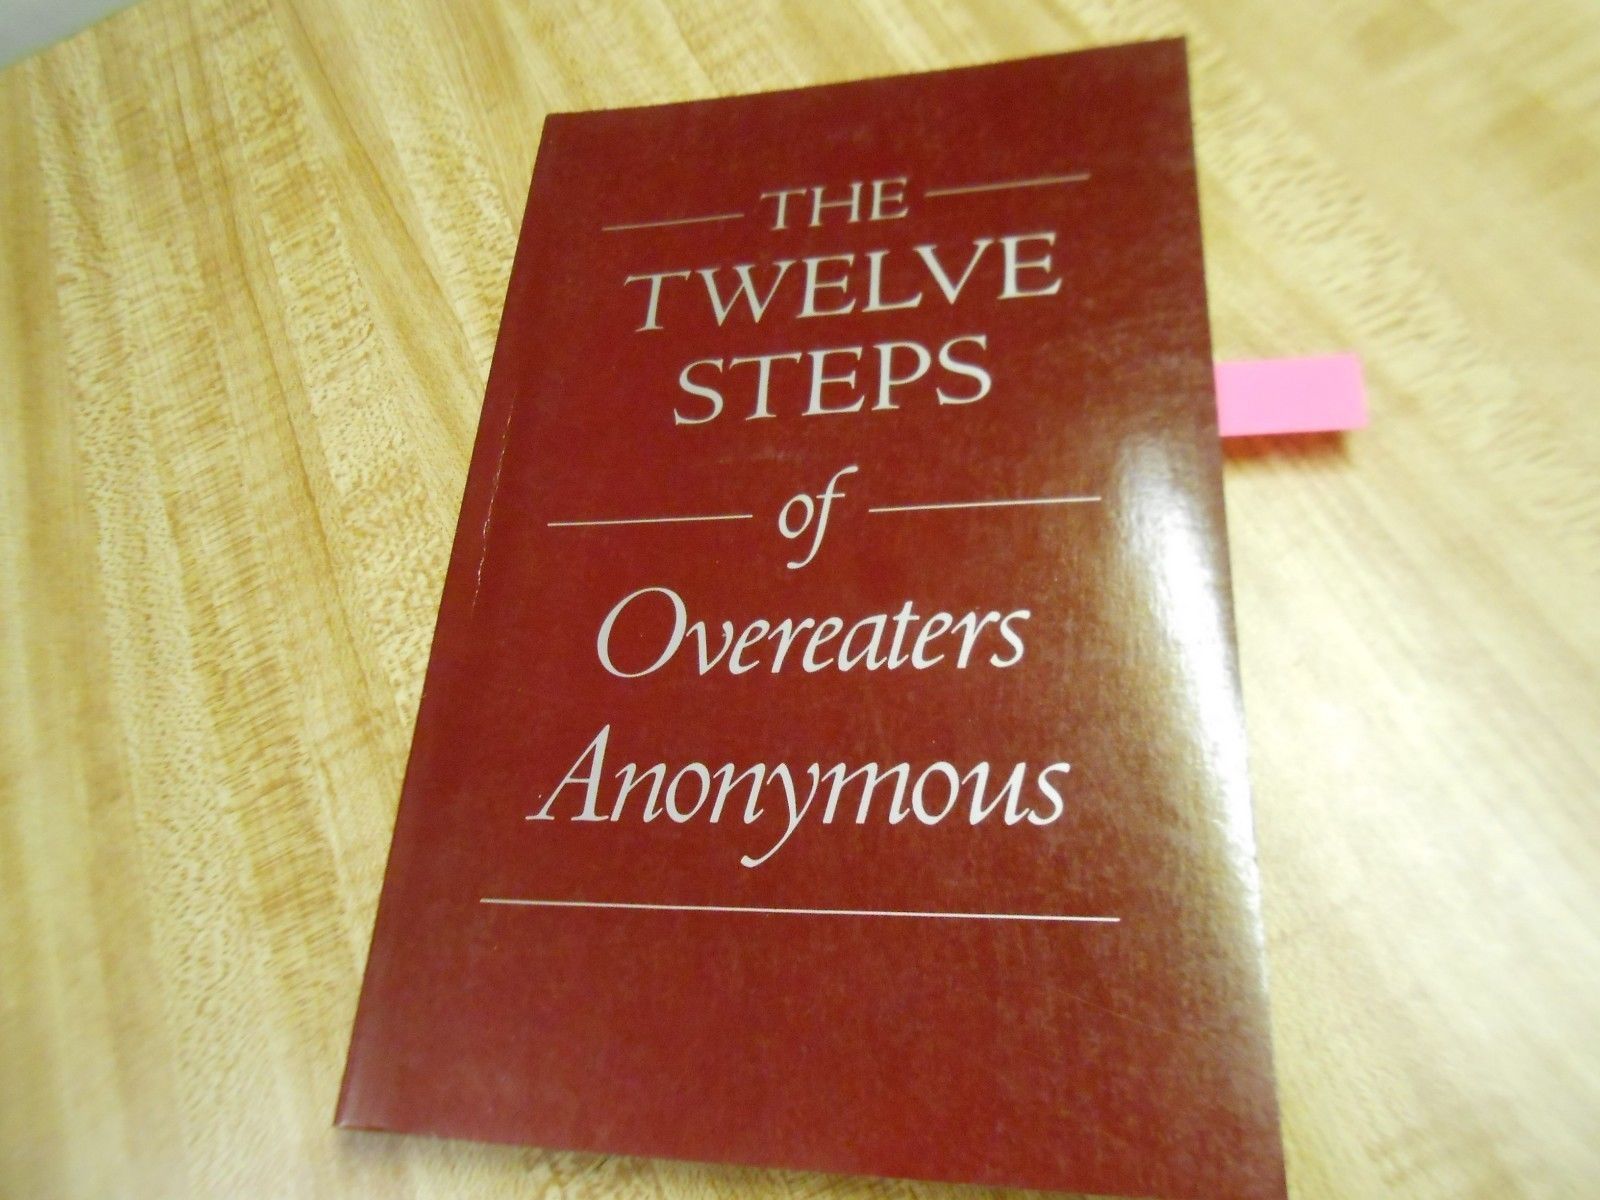 the-twelve-steps-of-overeaters-anonymous-oa-12-step-recovery